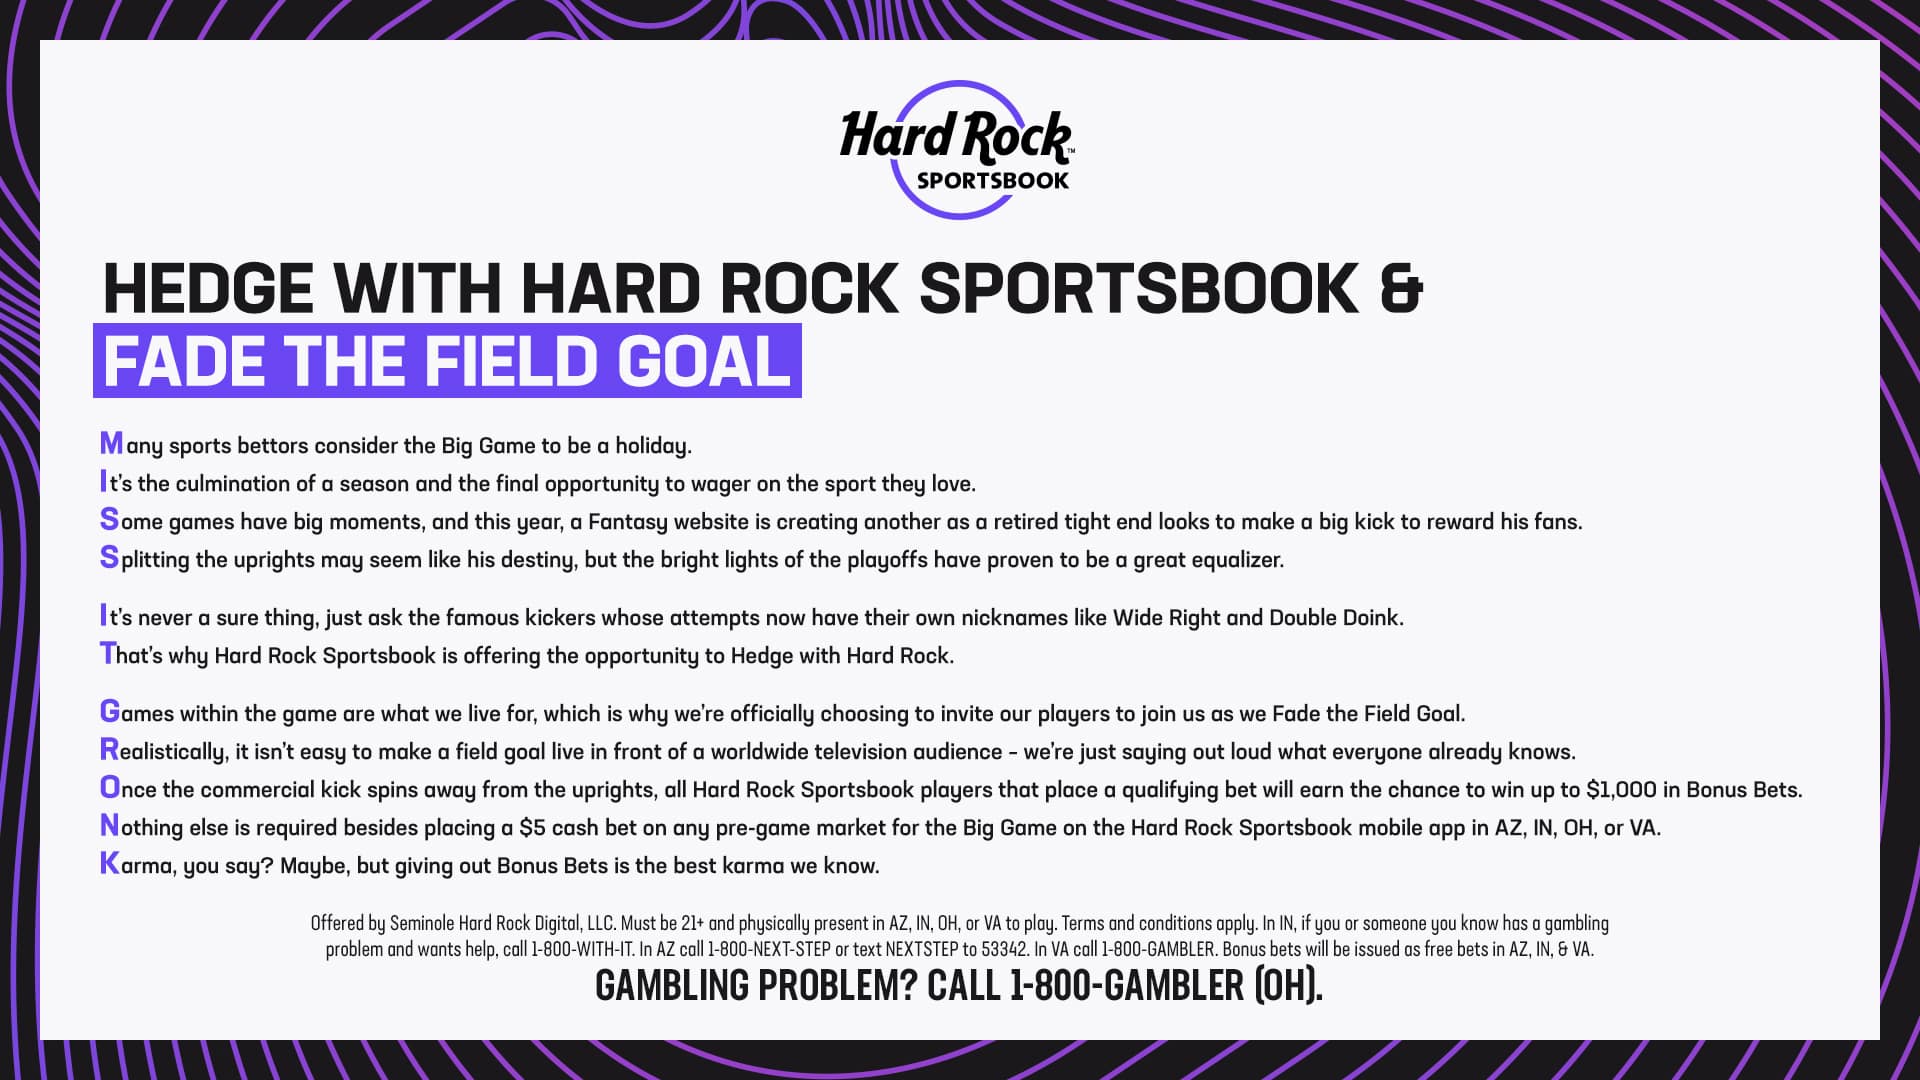 Hedge with Hard Rock Sportsbook for the Big Game, Fade the Field Goal